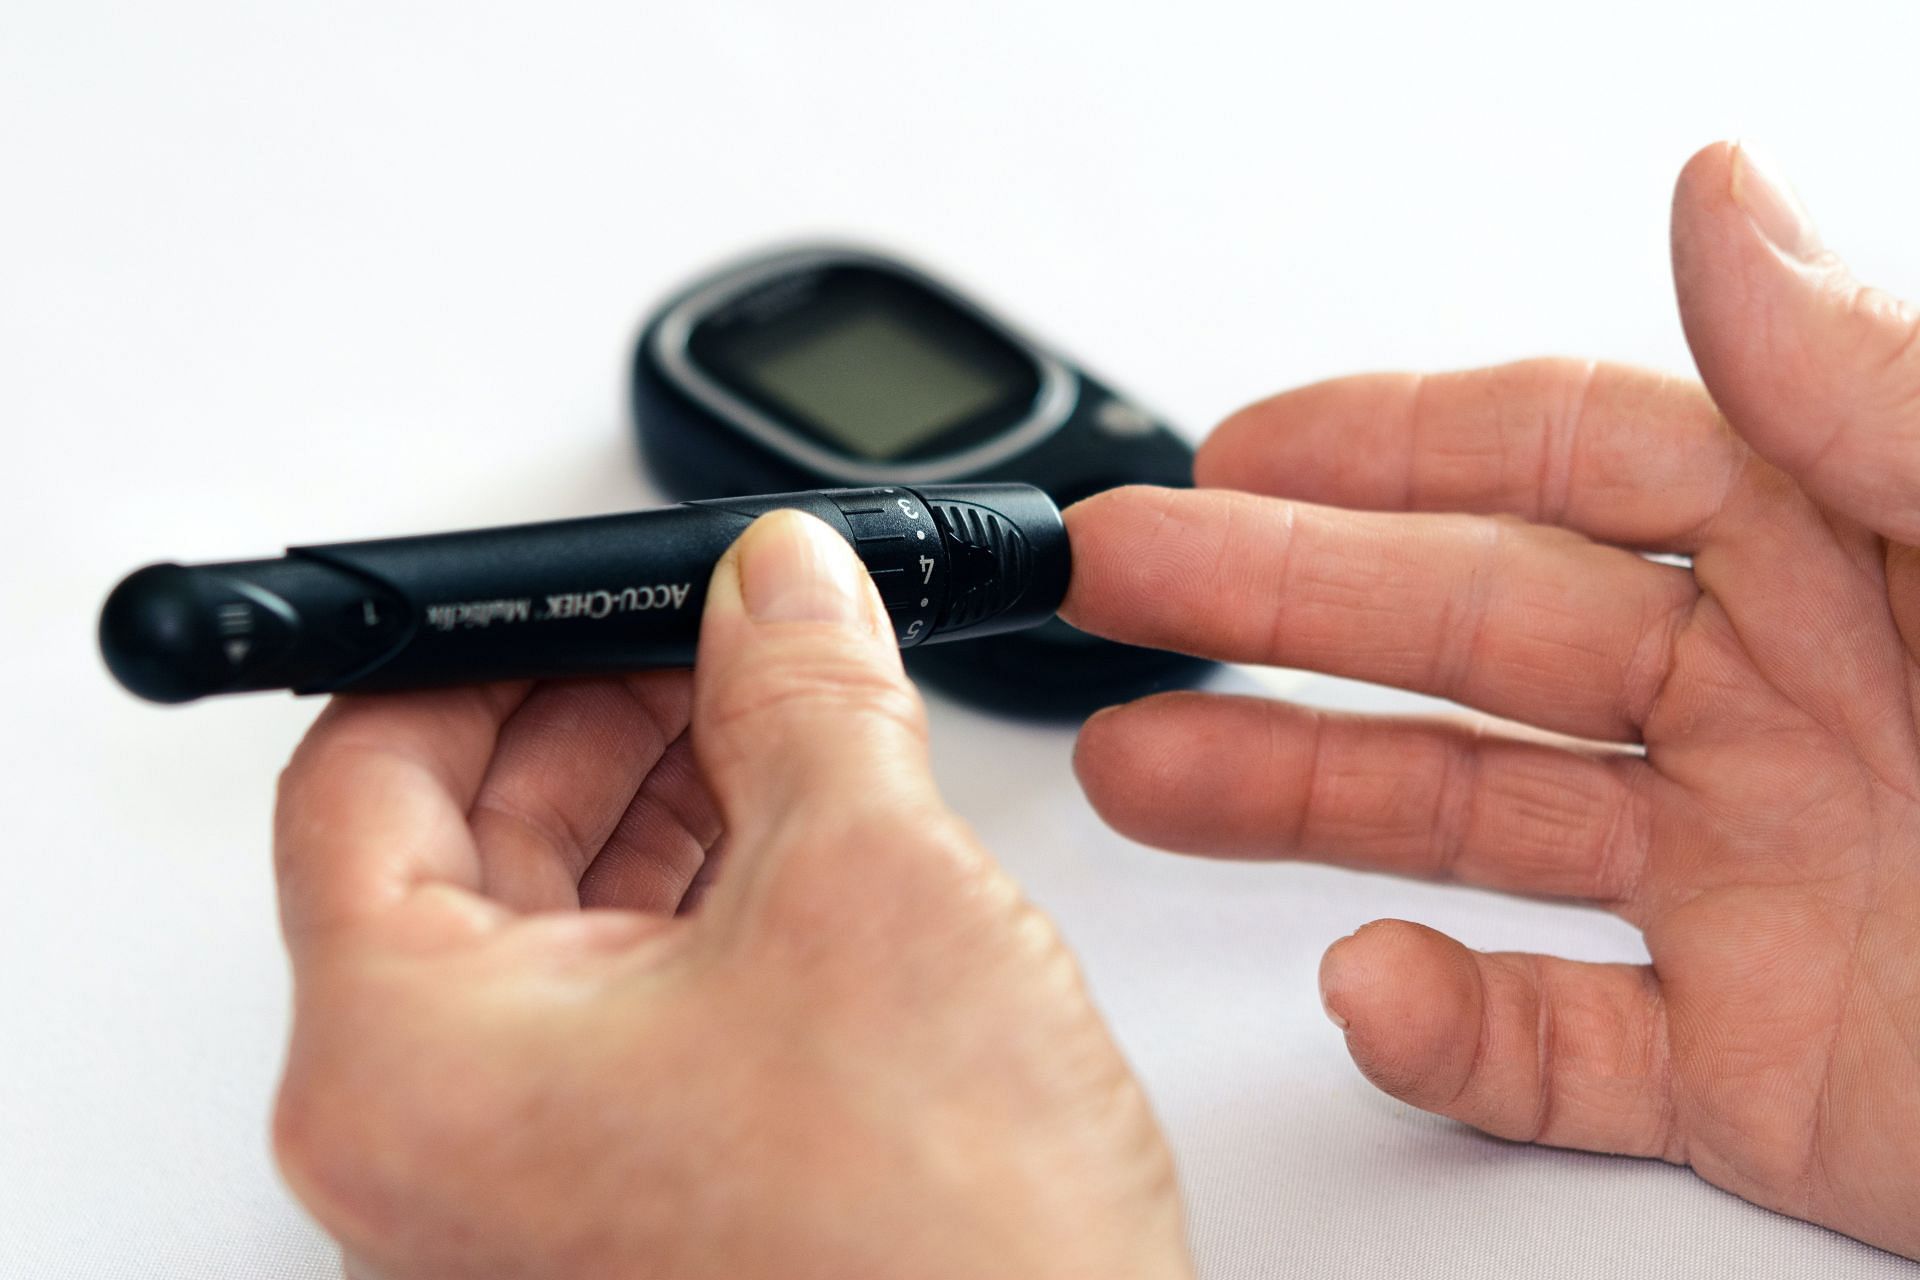 Keeps your blood sugar level in check. (Image by Photomix company / Pexels)